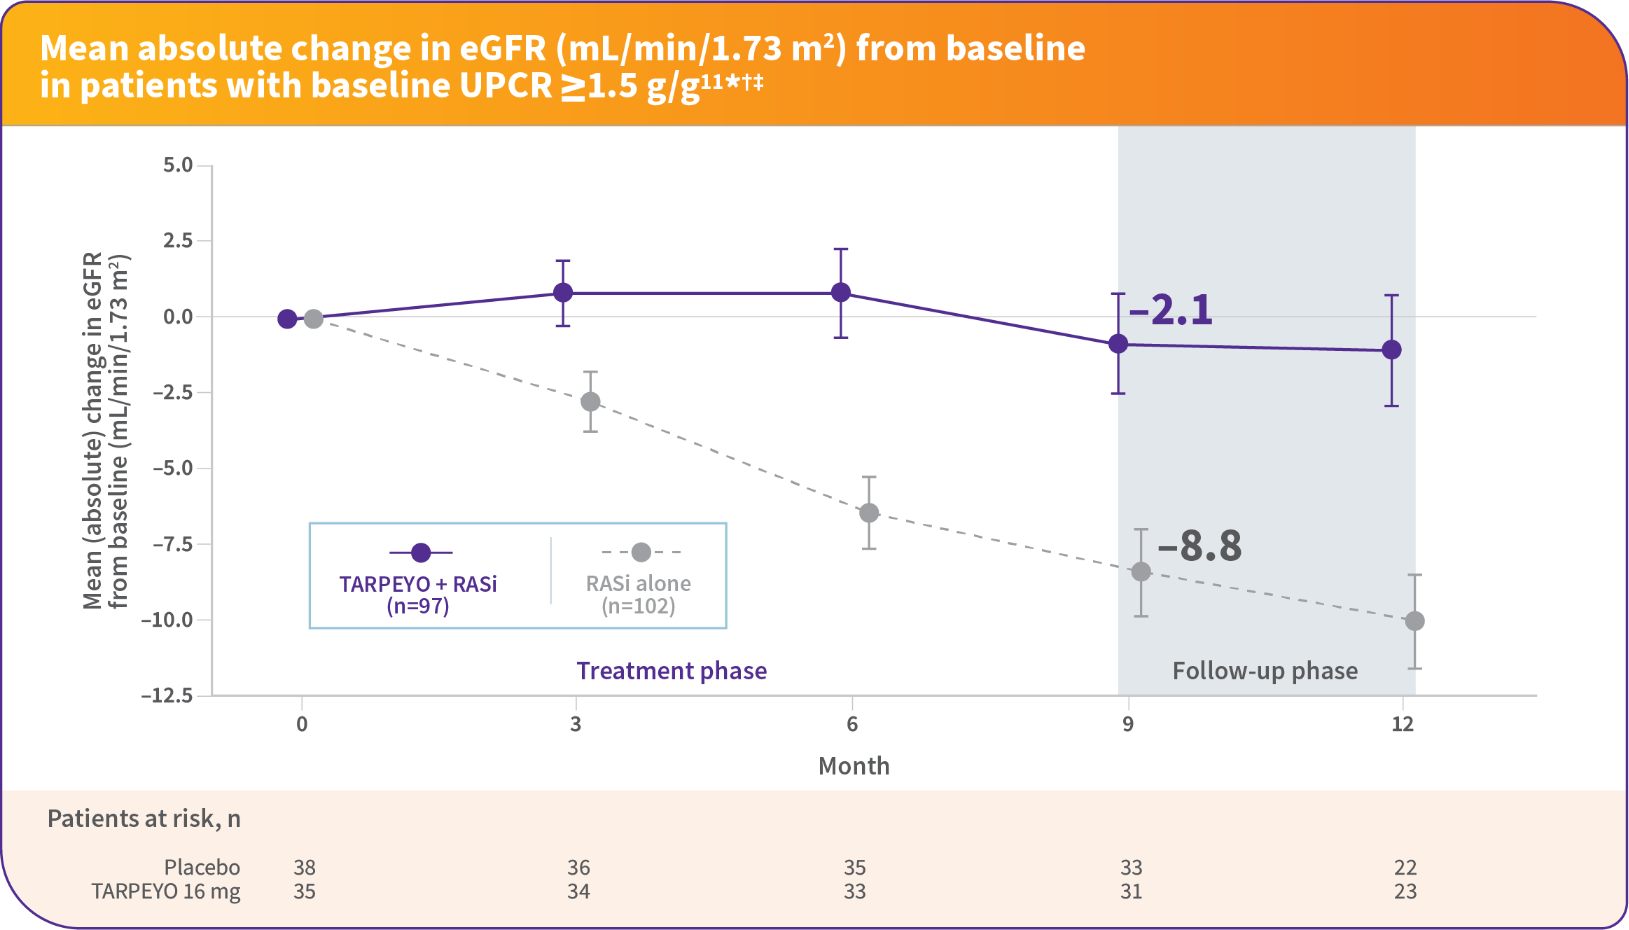 The chart describes the mean absolute eGFR change in patients  